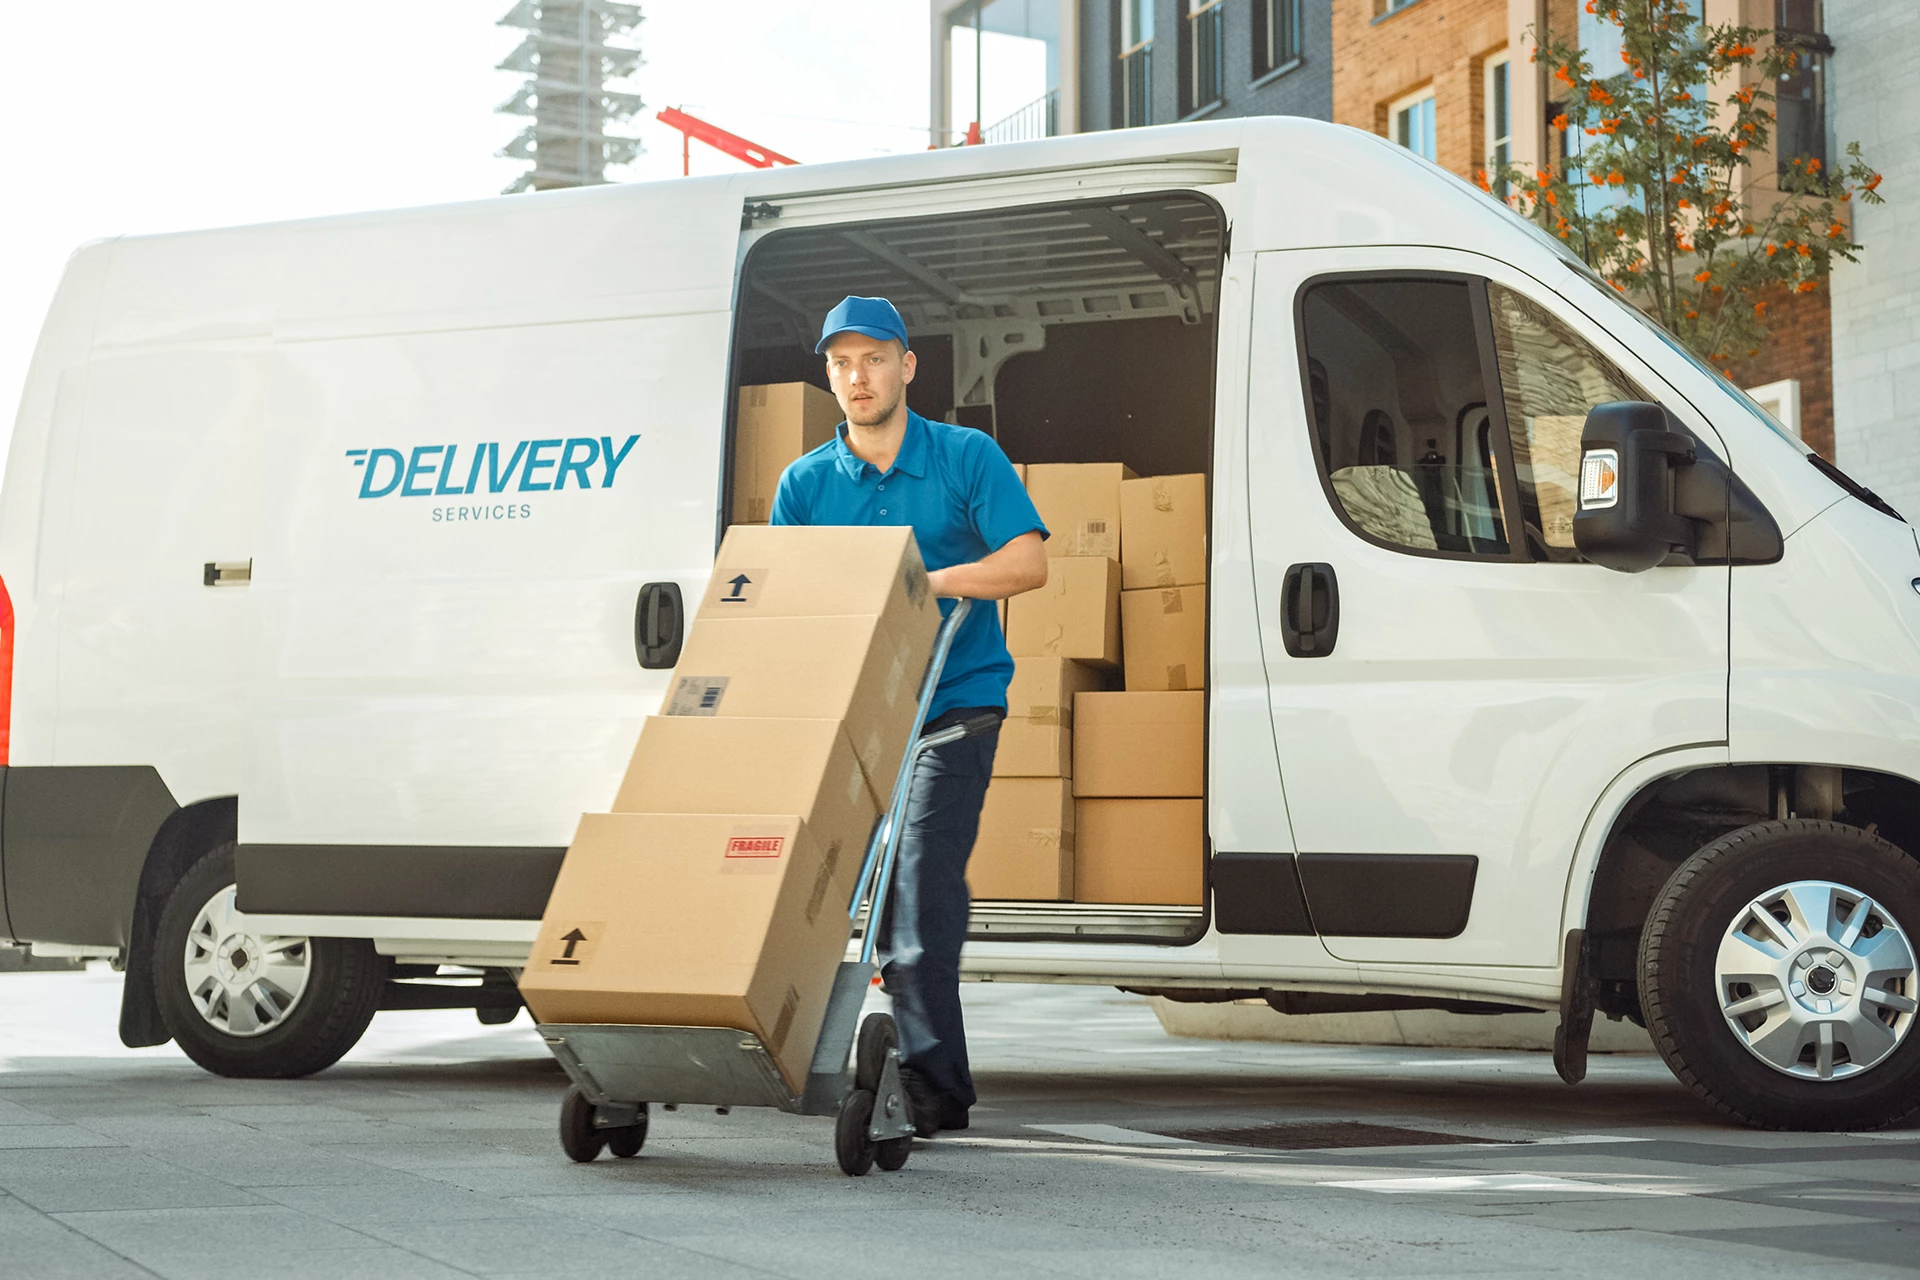 Delivery Disrupted: Mastering the Next Era of Delivery Dynamics with Hylman's Visionary Insight